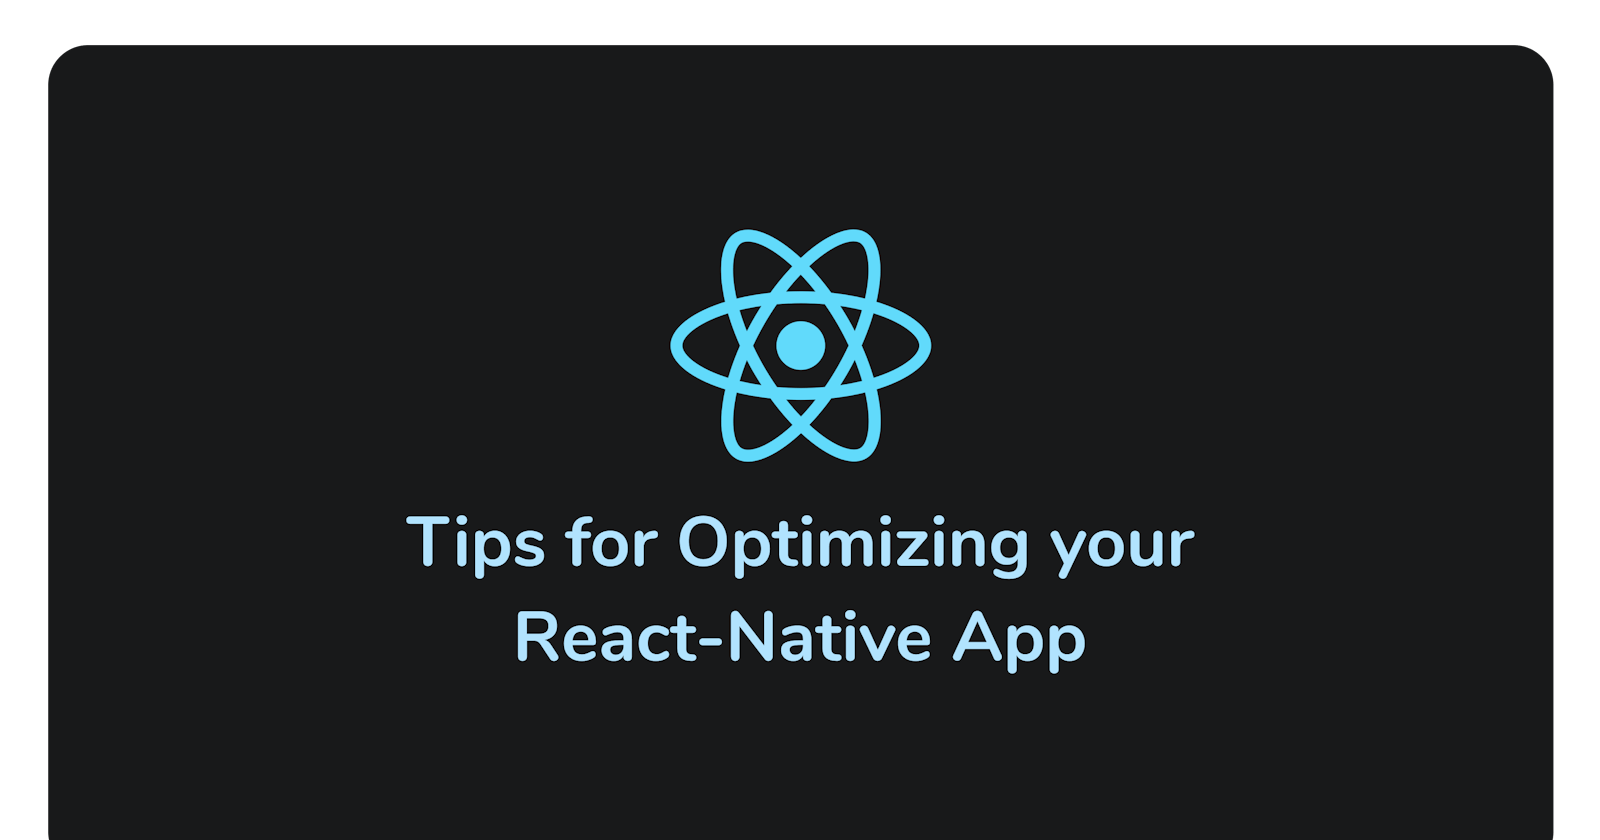 Tips for Optimizing your React-Native App